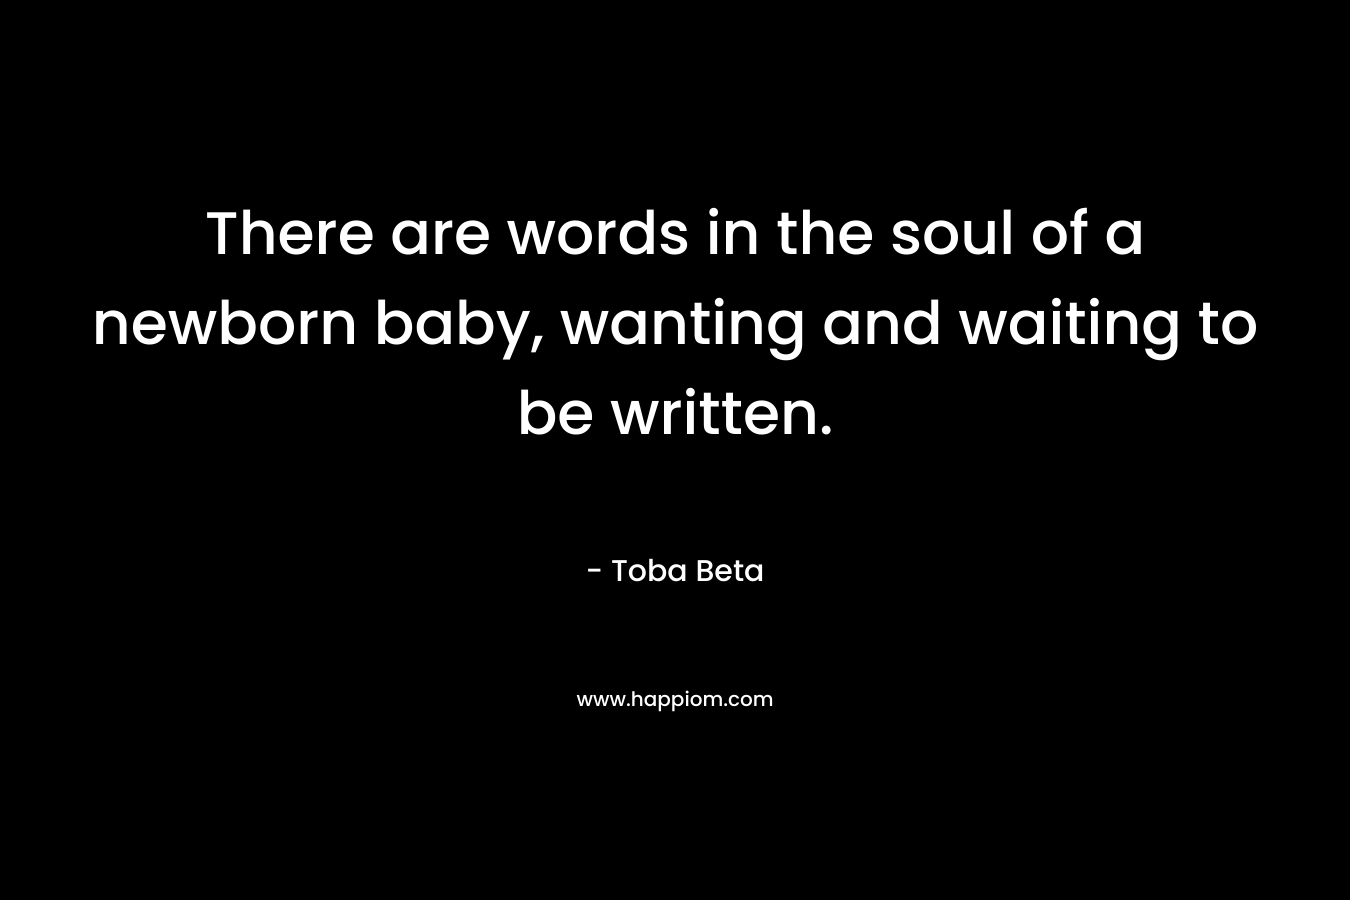 There are words in the soul of a newborn baby, wanting and waiting to be written. – Toba Beta